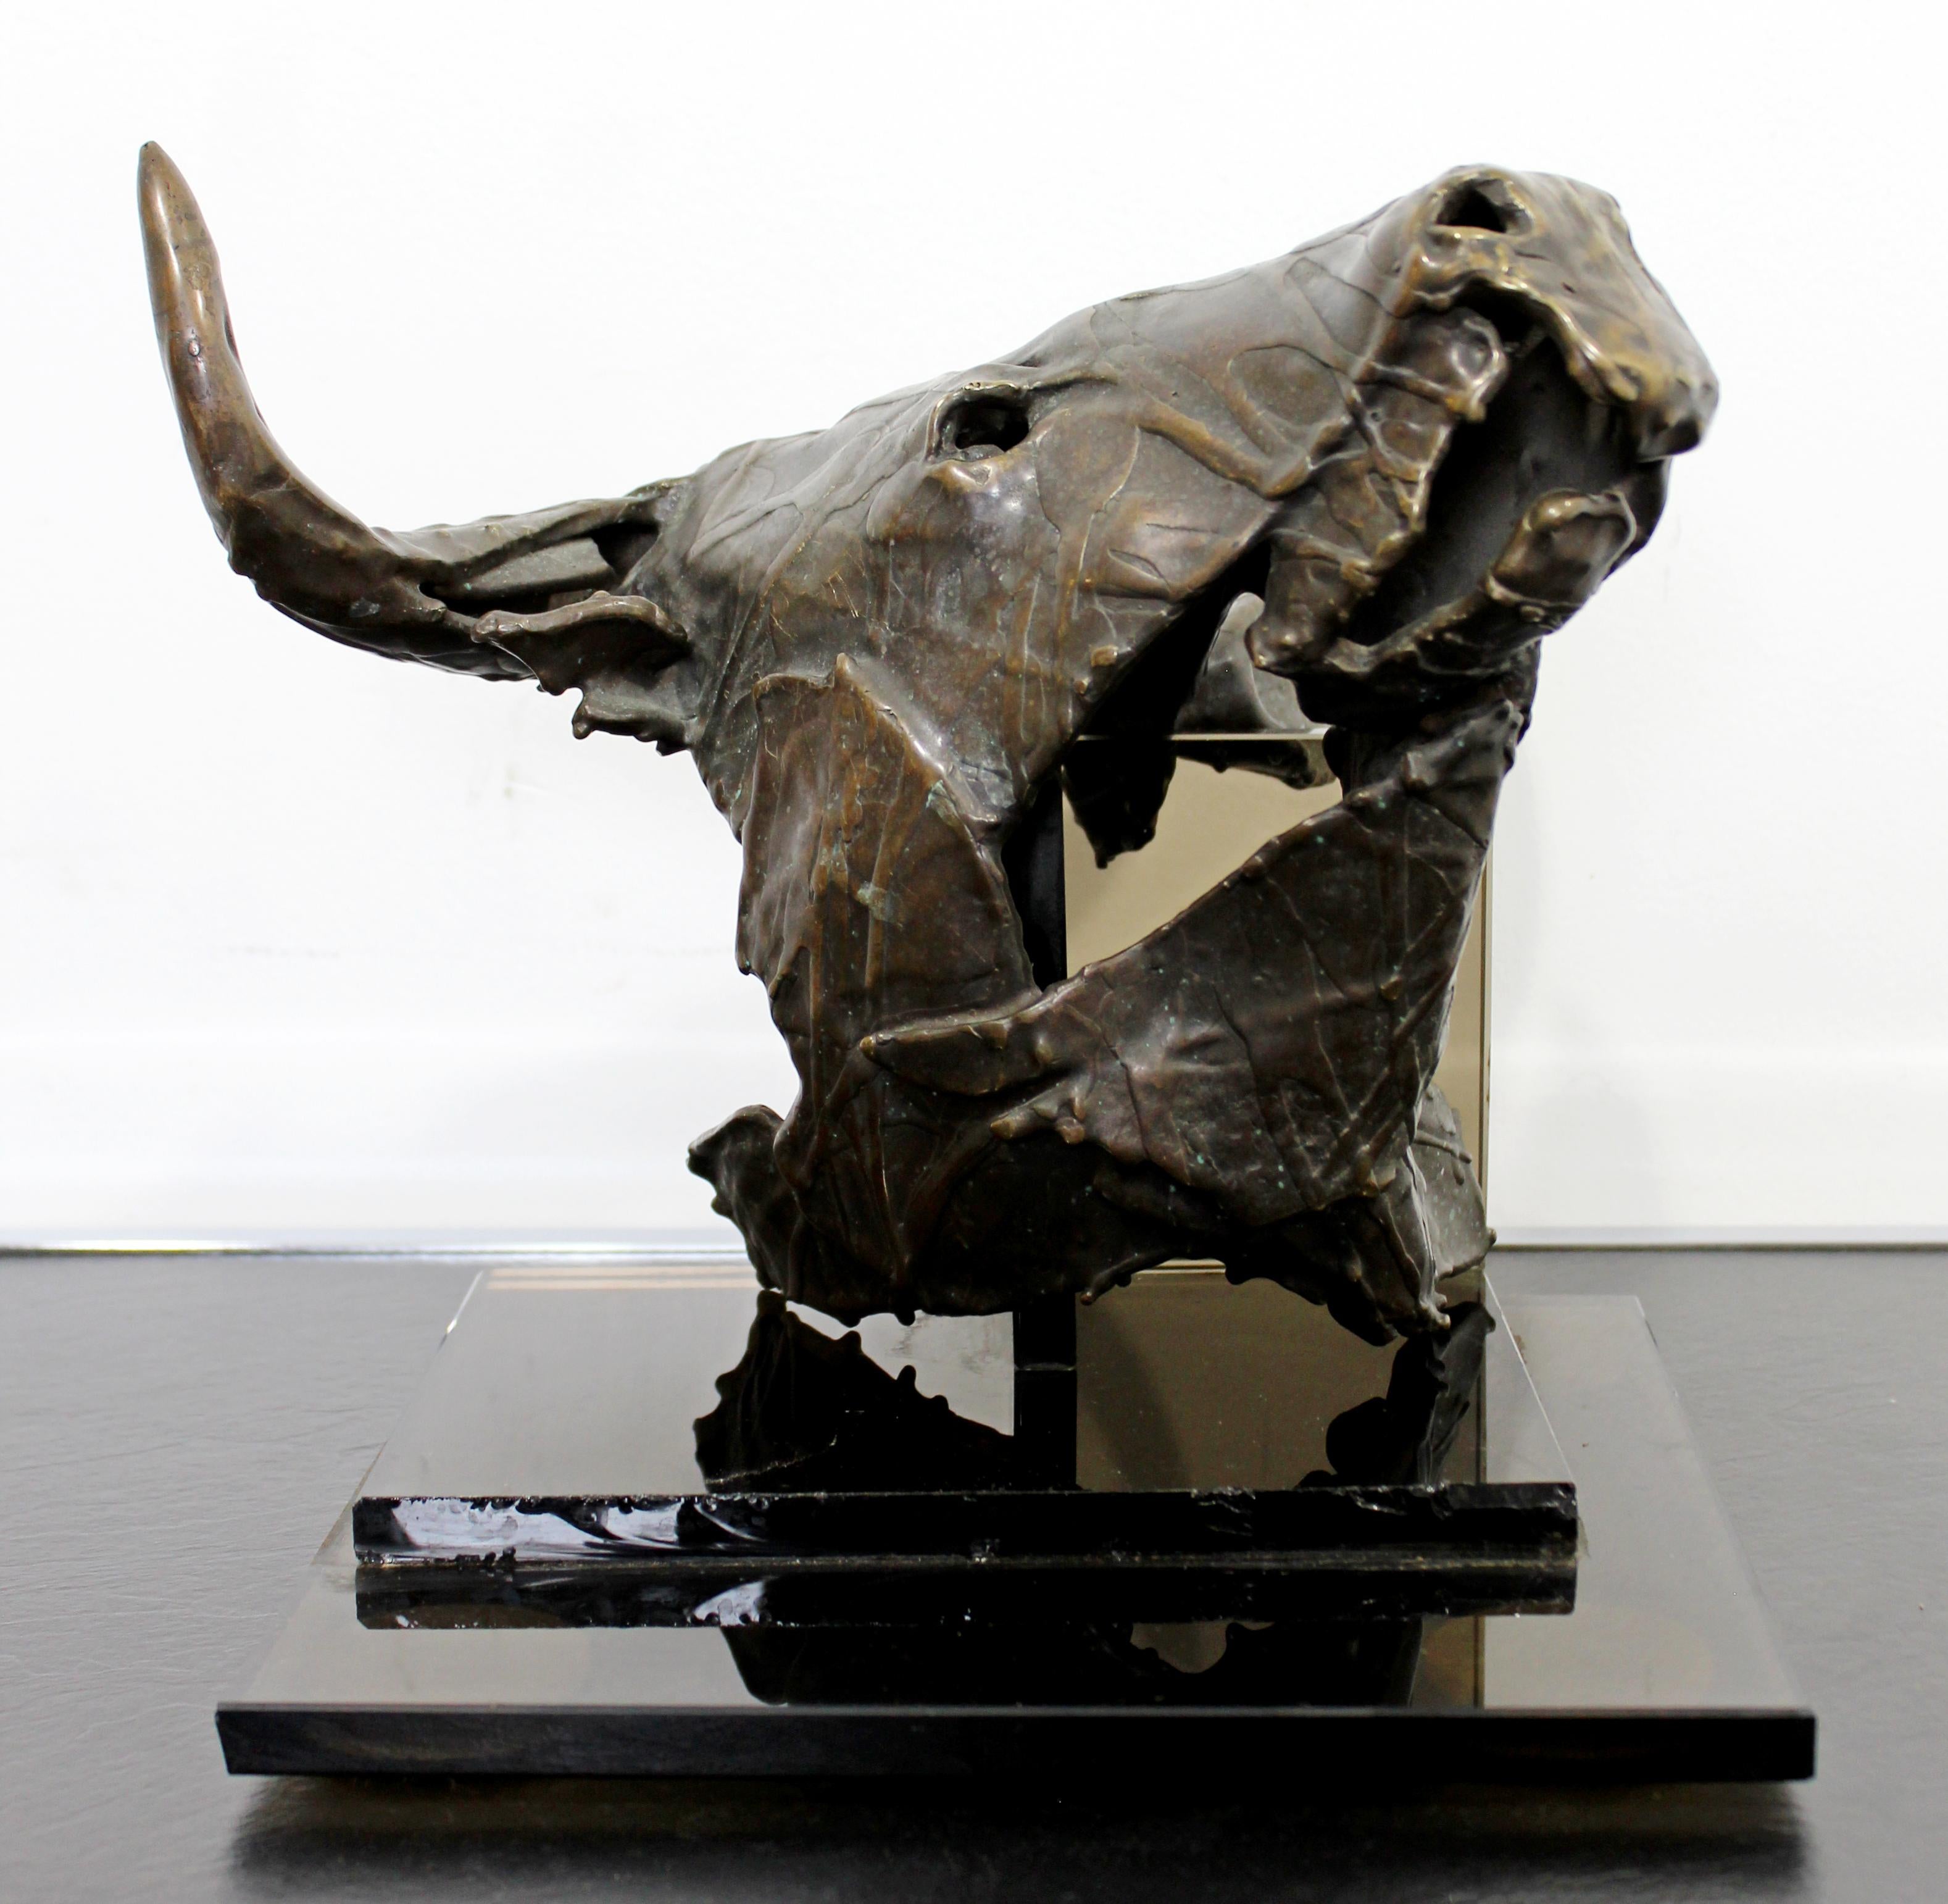 For your consideration is a gorgeous, bronze table sculpture, of a steer's head, signed by Gordon Hipp, dated 1994. In excellent condition, but the glass stand has chips. The dimensions of the sculpture on the stand are 11